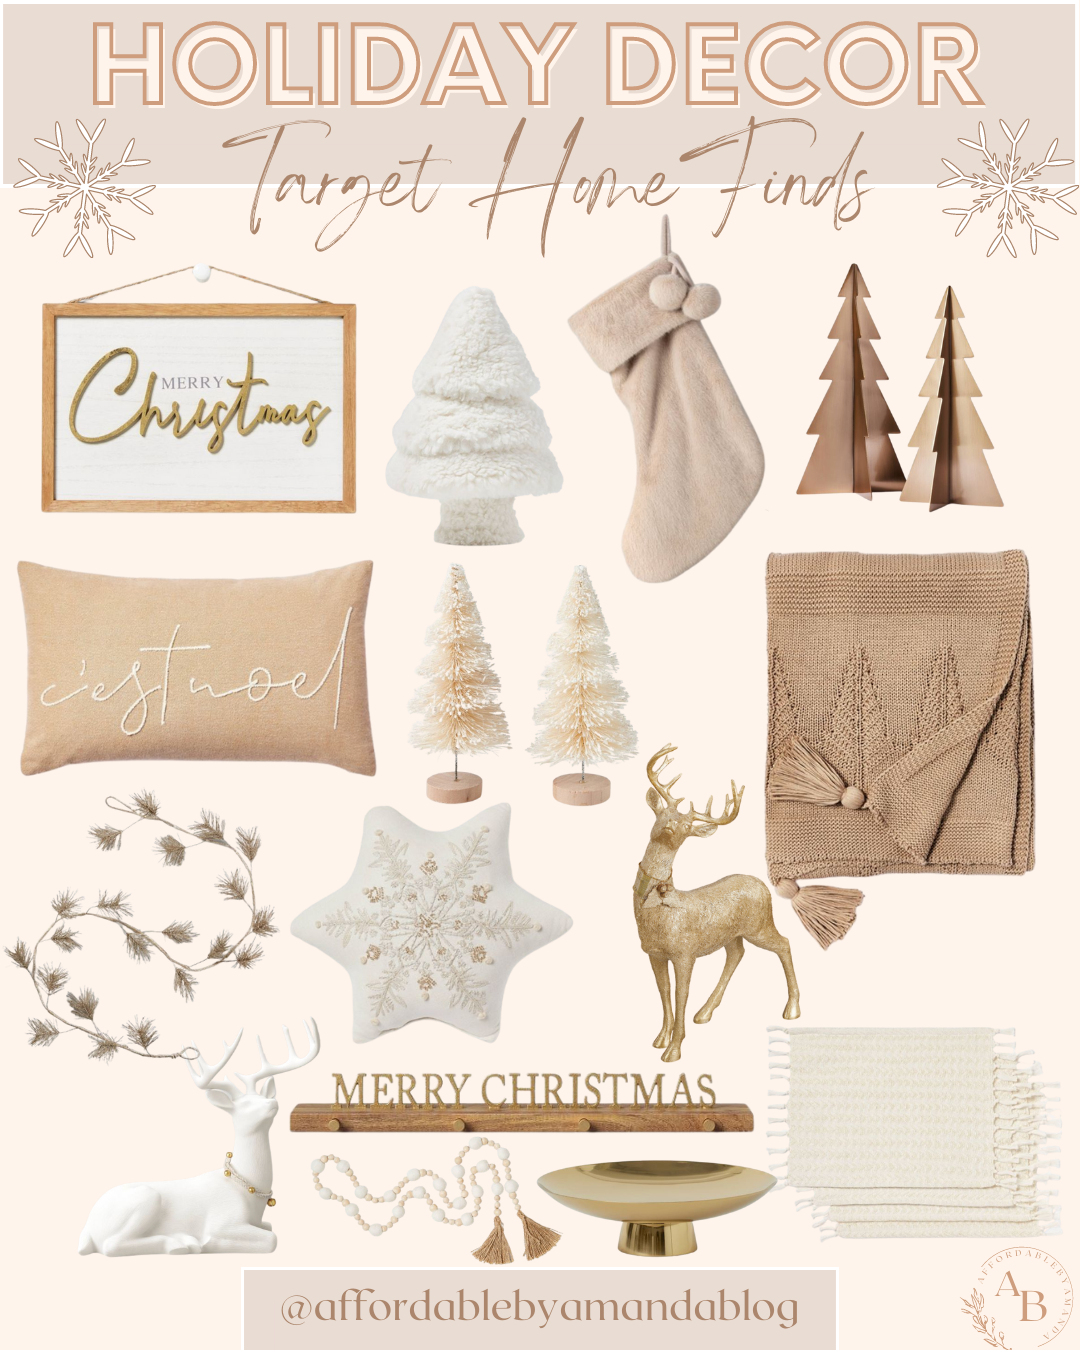 Target Christmas Decorations 2021 - Affordable by Amanda